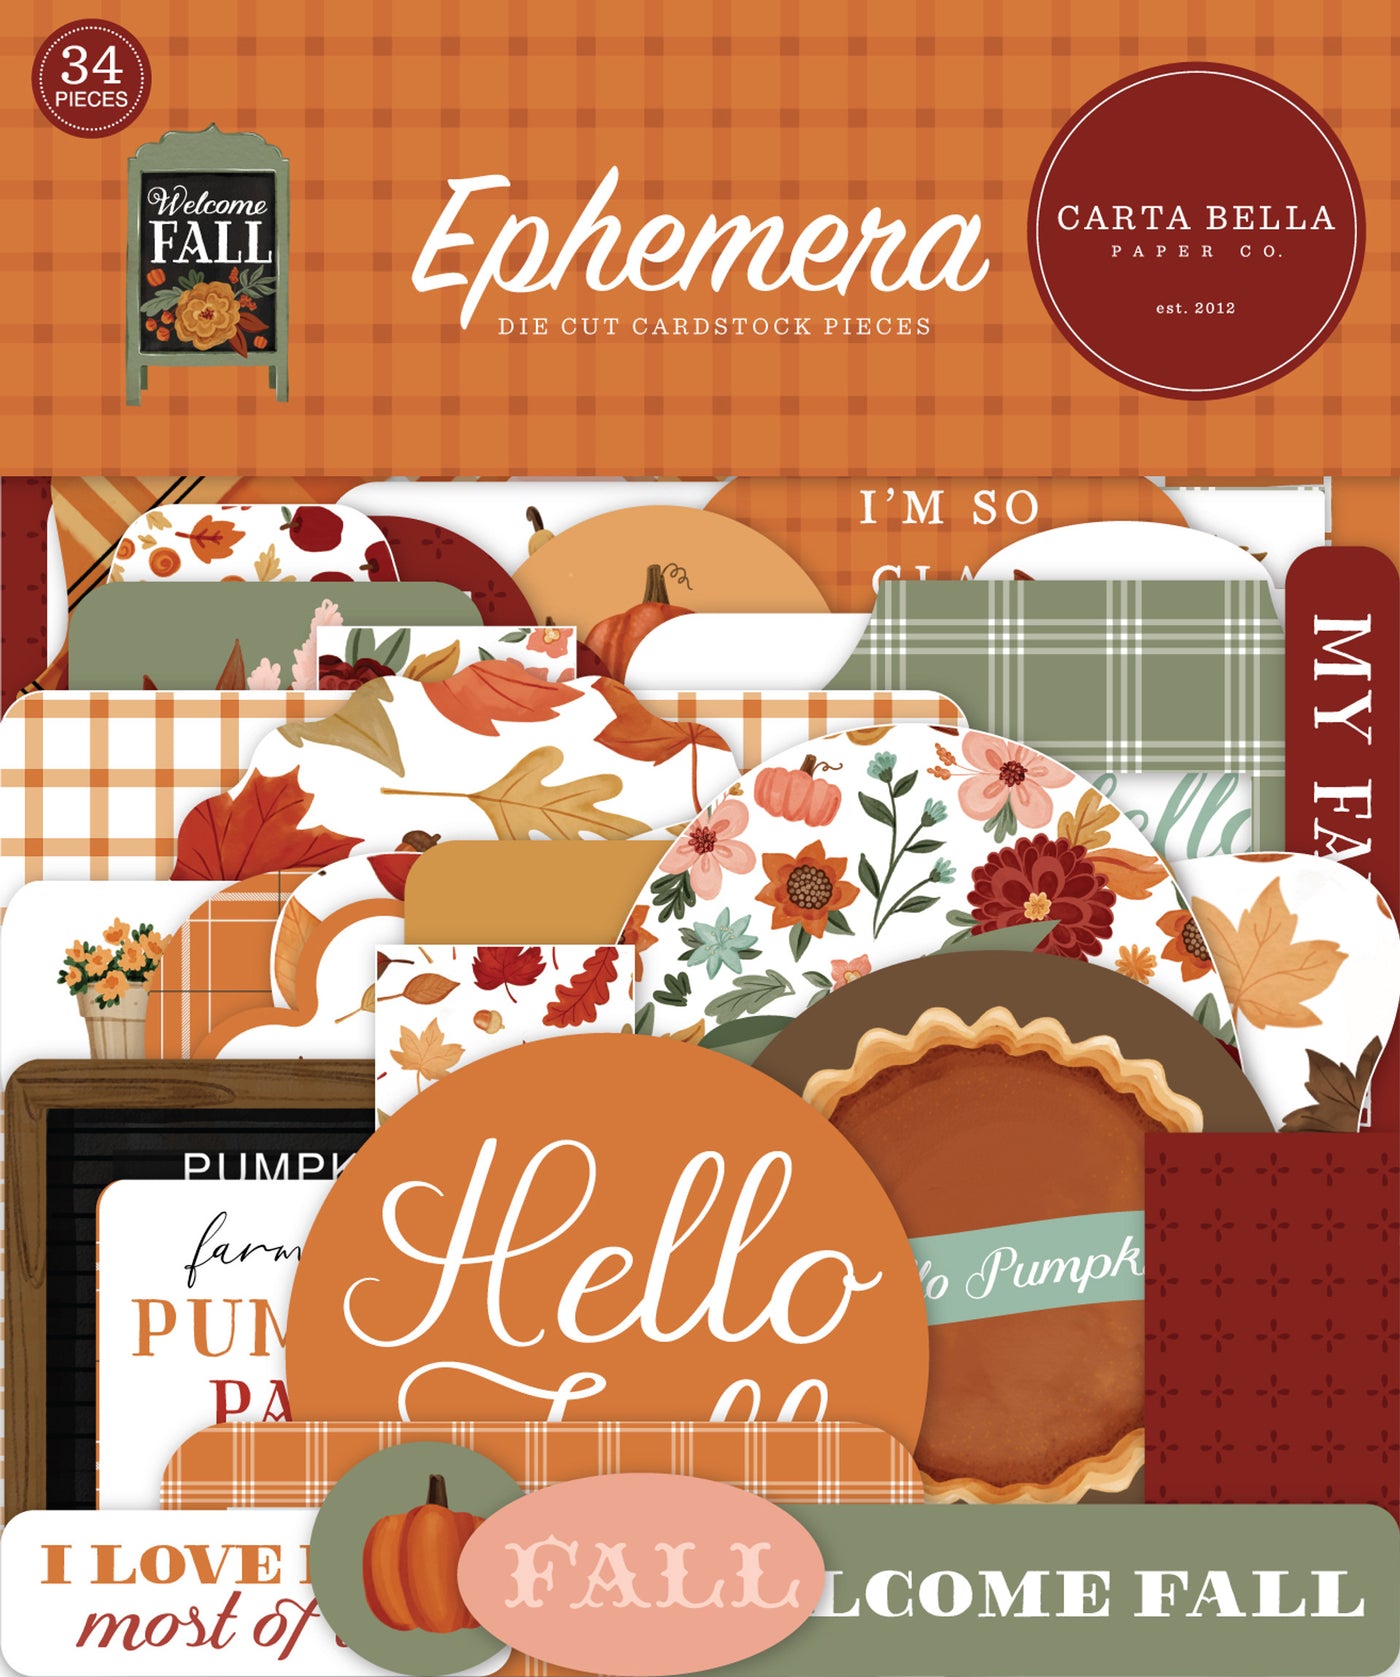 Welcome Fall Ephemera Die Cut Cardstock Pack. Pack includes 34 different die-cut shapes ready to embellish any project.